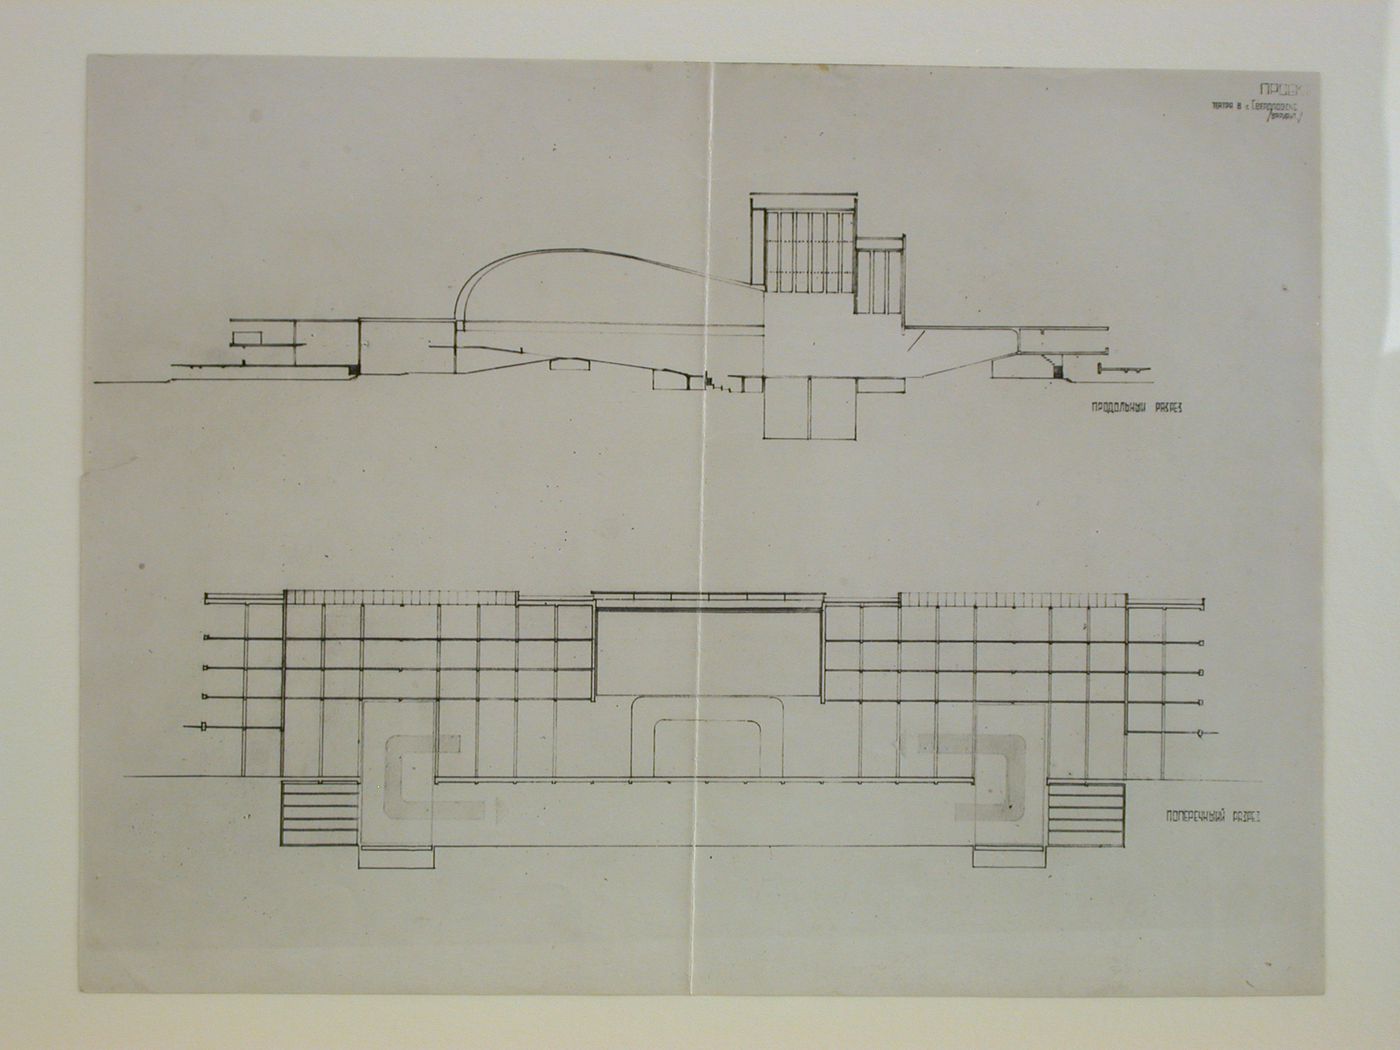 Photograph of sections for the second round of competition for a "synthetic theater" in Sverdlovsk, Soviet Union (now Ekaterinburg, Russia)